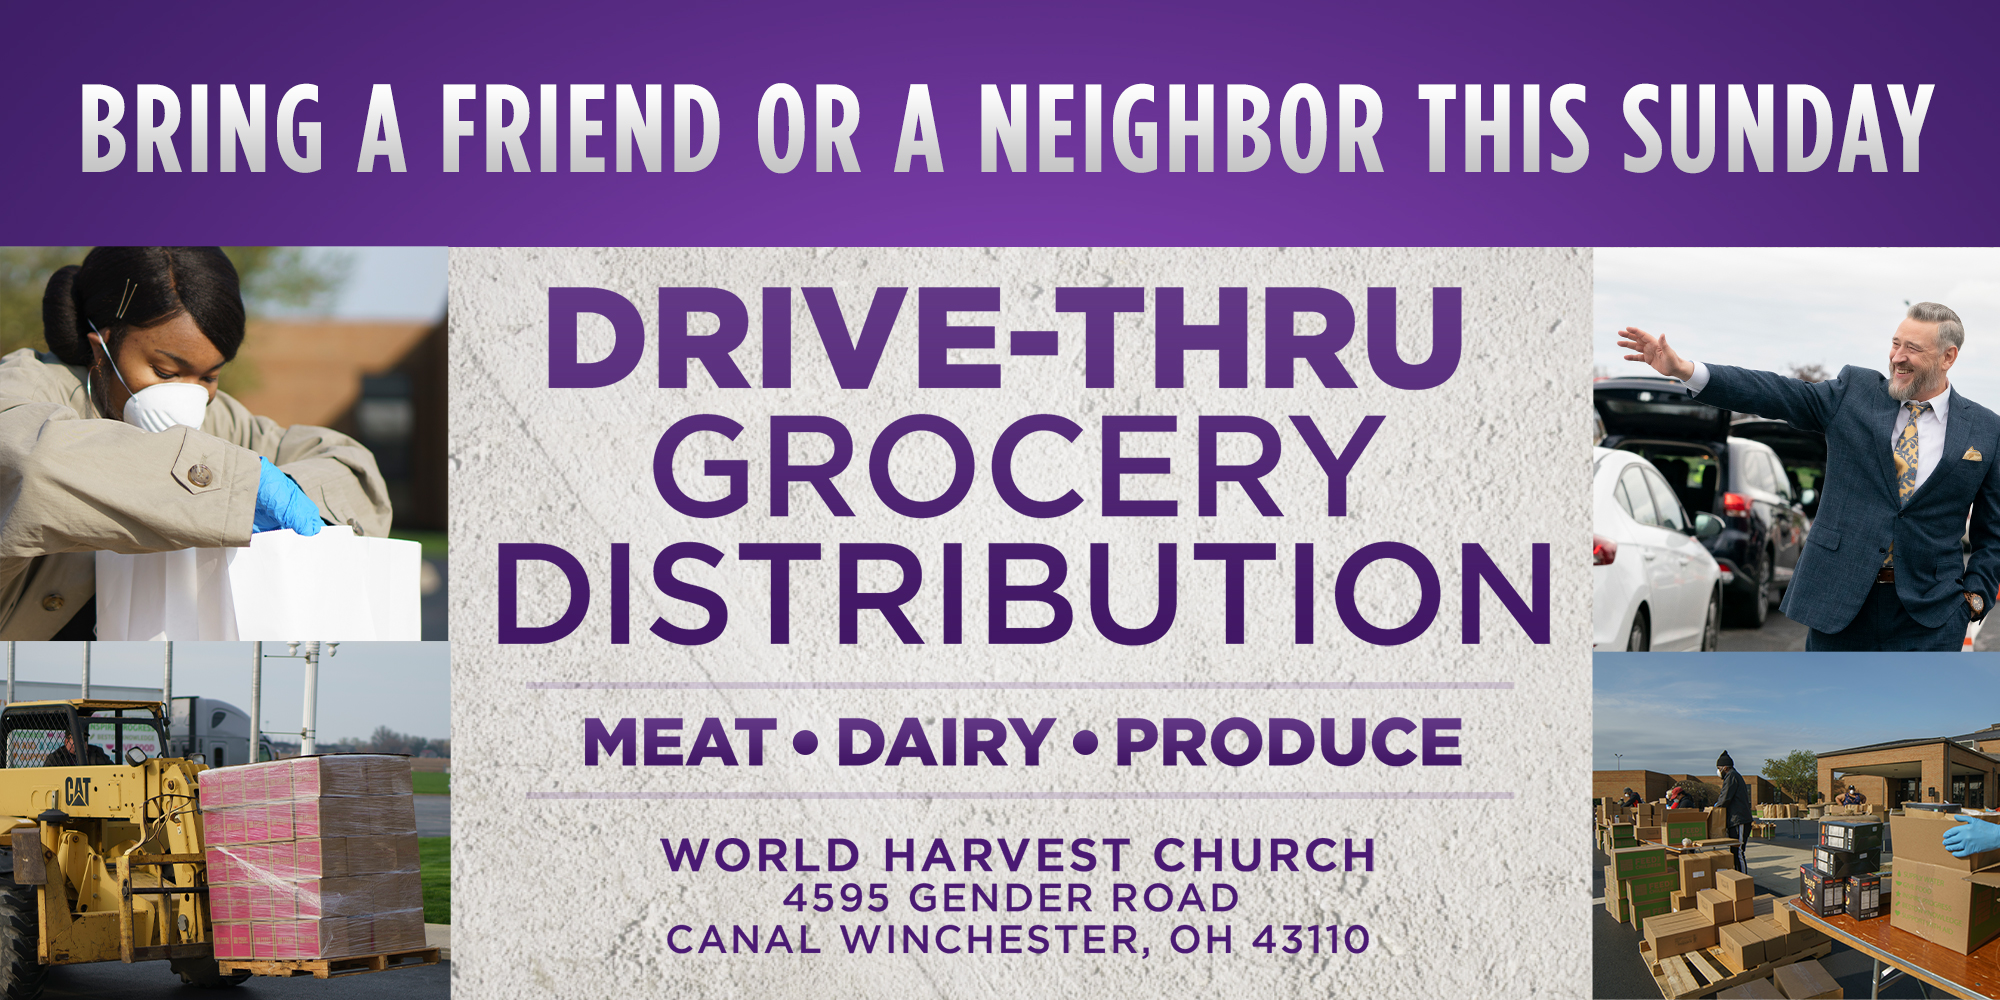 Drive-Thru Grocery Distribution Meat, Dairy, Produce World Harvest Church 4595 Gender Rd Canal Winchester, OH 43110